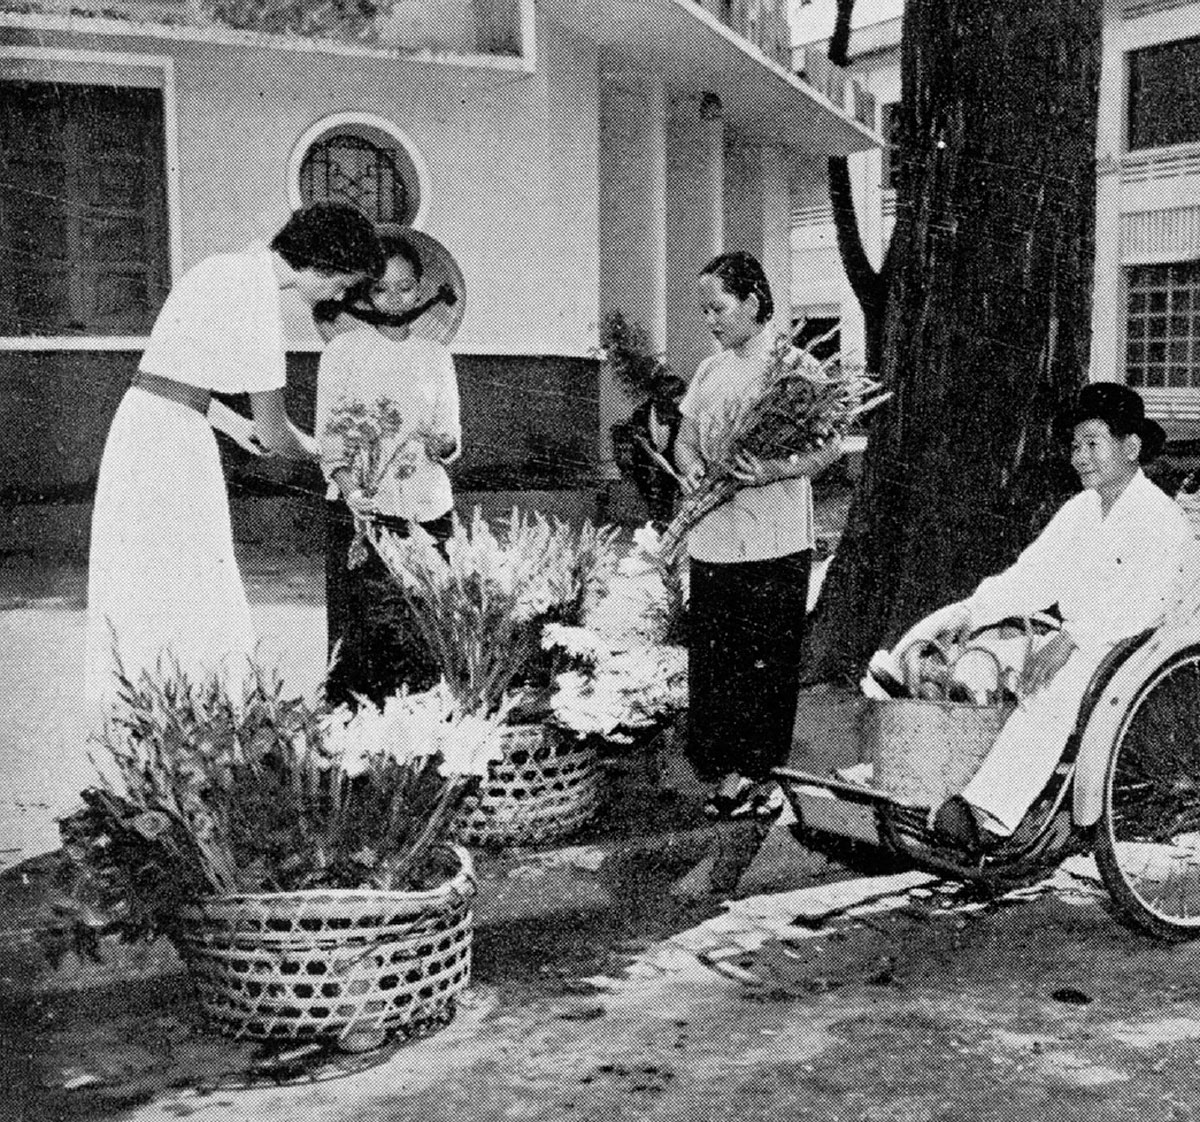 A photograph of flower vendors near the cathedral in Saigon. From a 1959 book published by the American Women’s Association of Saigon entitled “Saigon: A Booklet of Helpful Information for American in Vietnam.”